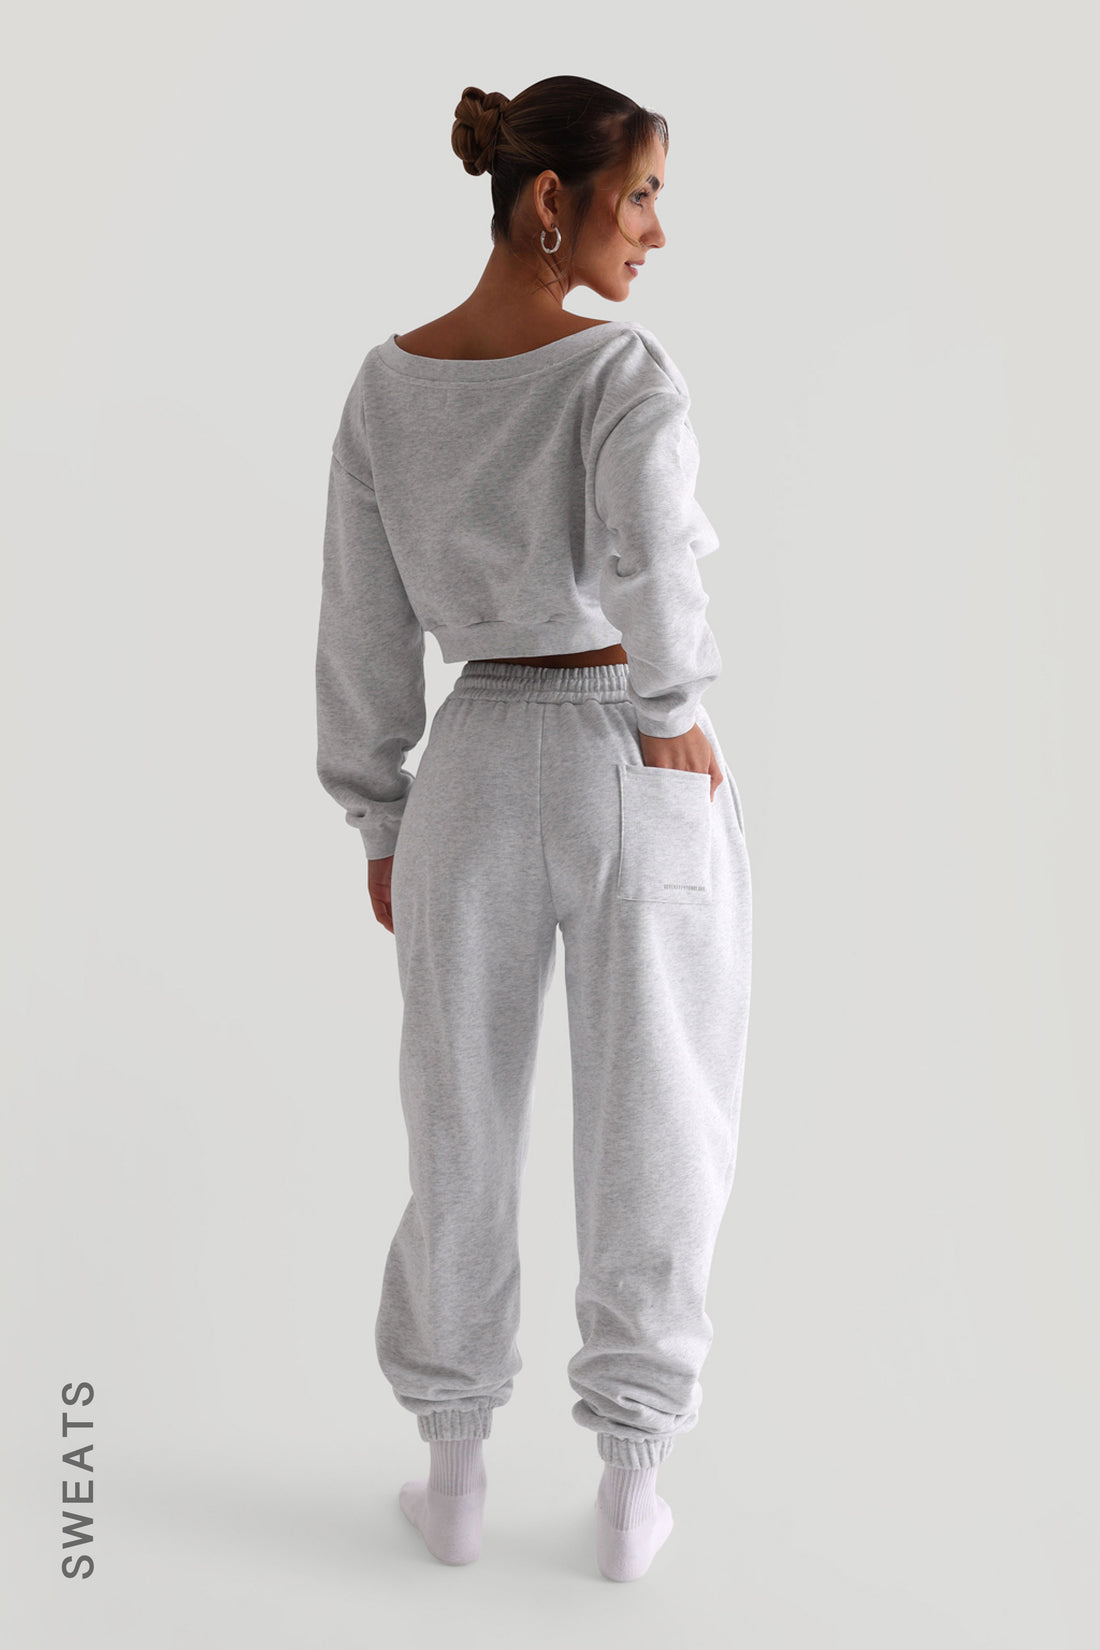 Baggy Fit Structured Sweatpants - Light Heather Gray